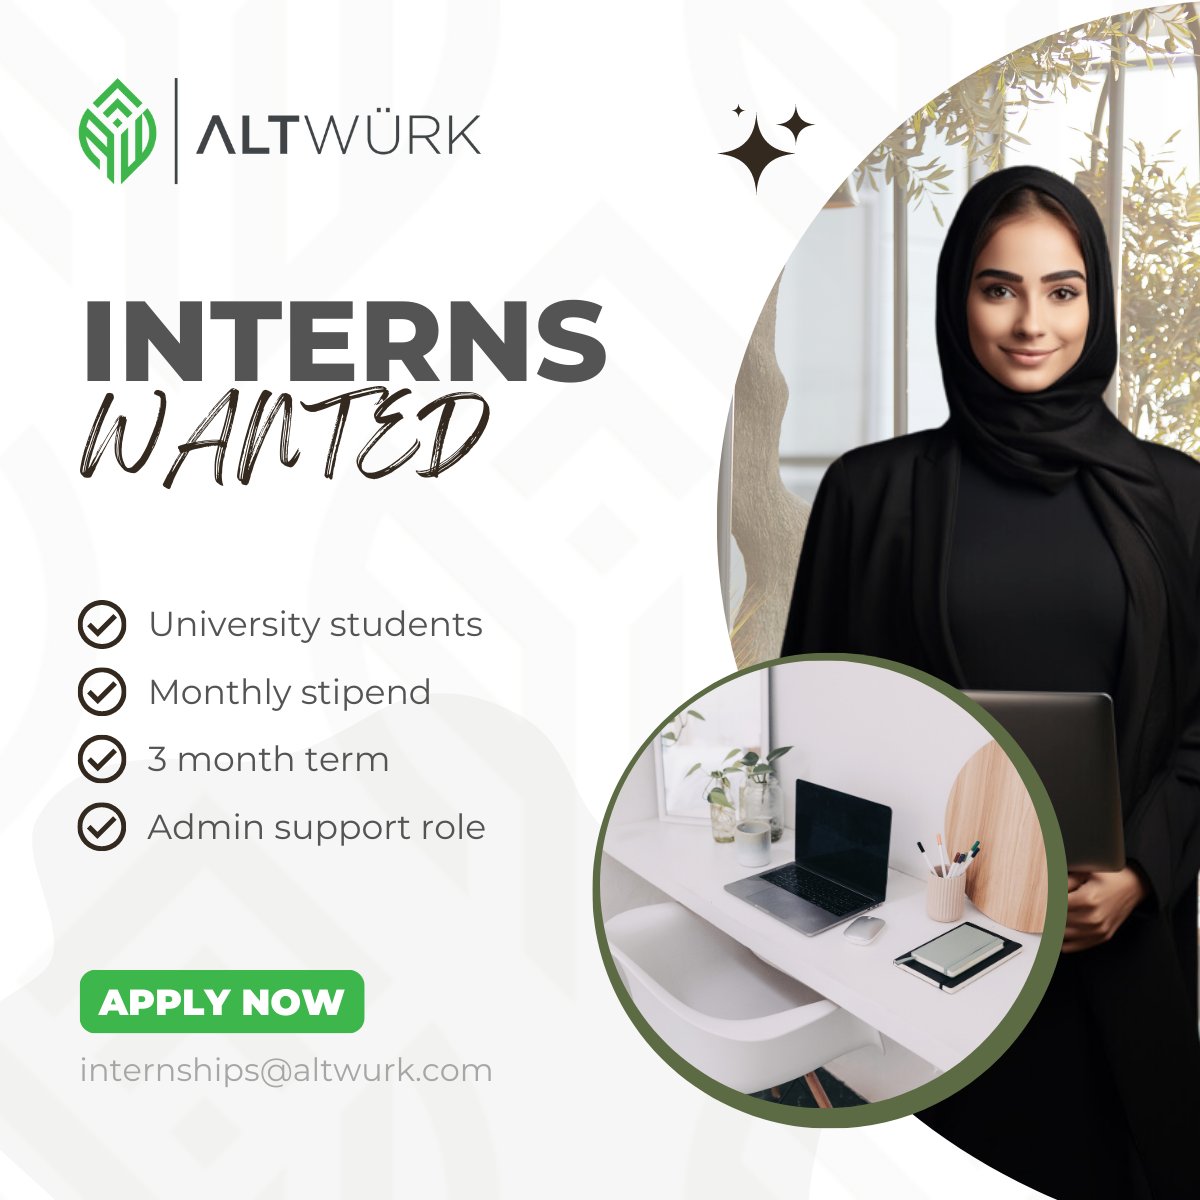 📢 Calling all UAE University Students! 🇦🇪

Altwuürk is currently accepting applications for ambitious and enthusiastic interns to join our team. To apply, send your resume and a cover letter to internships@altwurk.com. 

#InternshipOpportunity #UAEInterns #HandsOnExperience